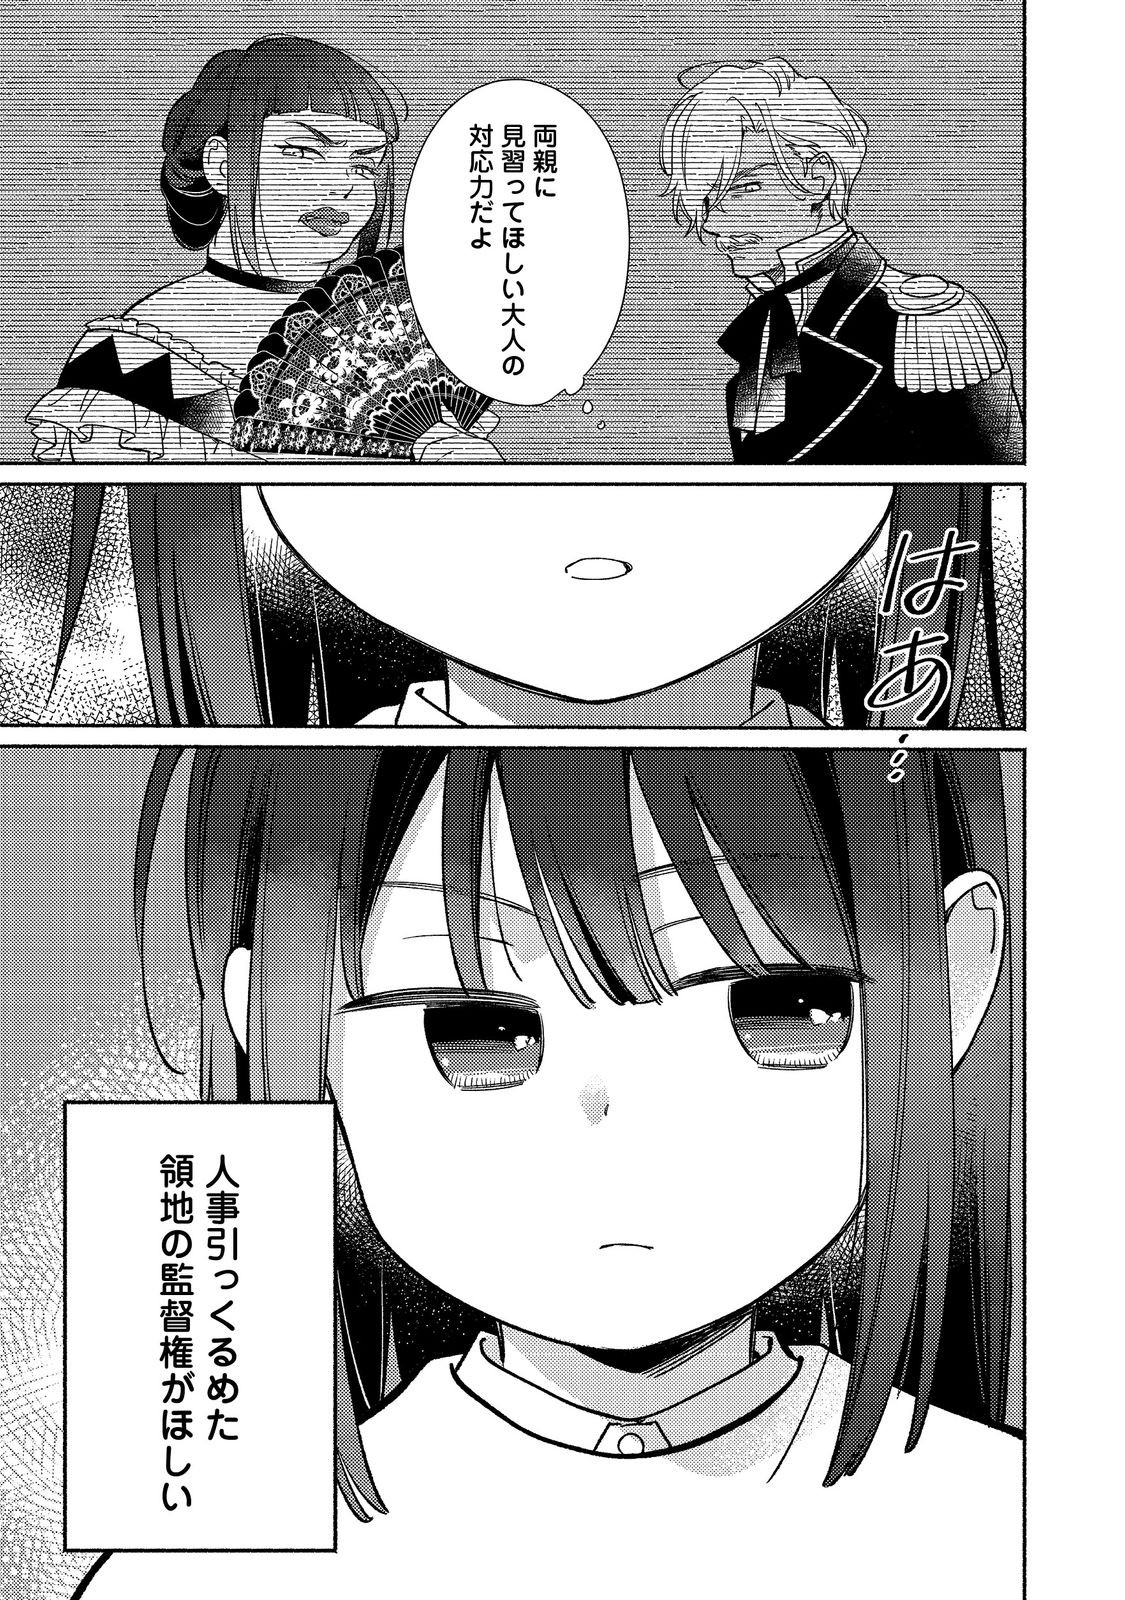 I’m the White Pig Nobleman 第24.2話 - Page 13